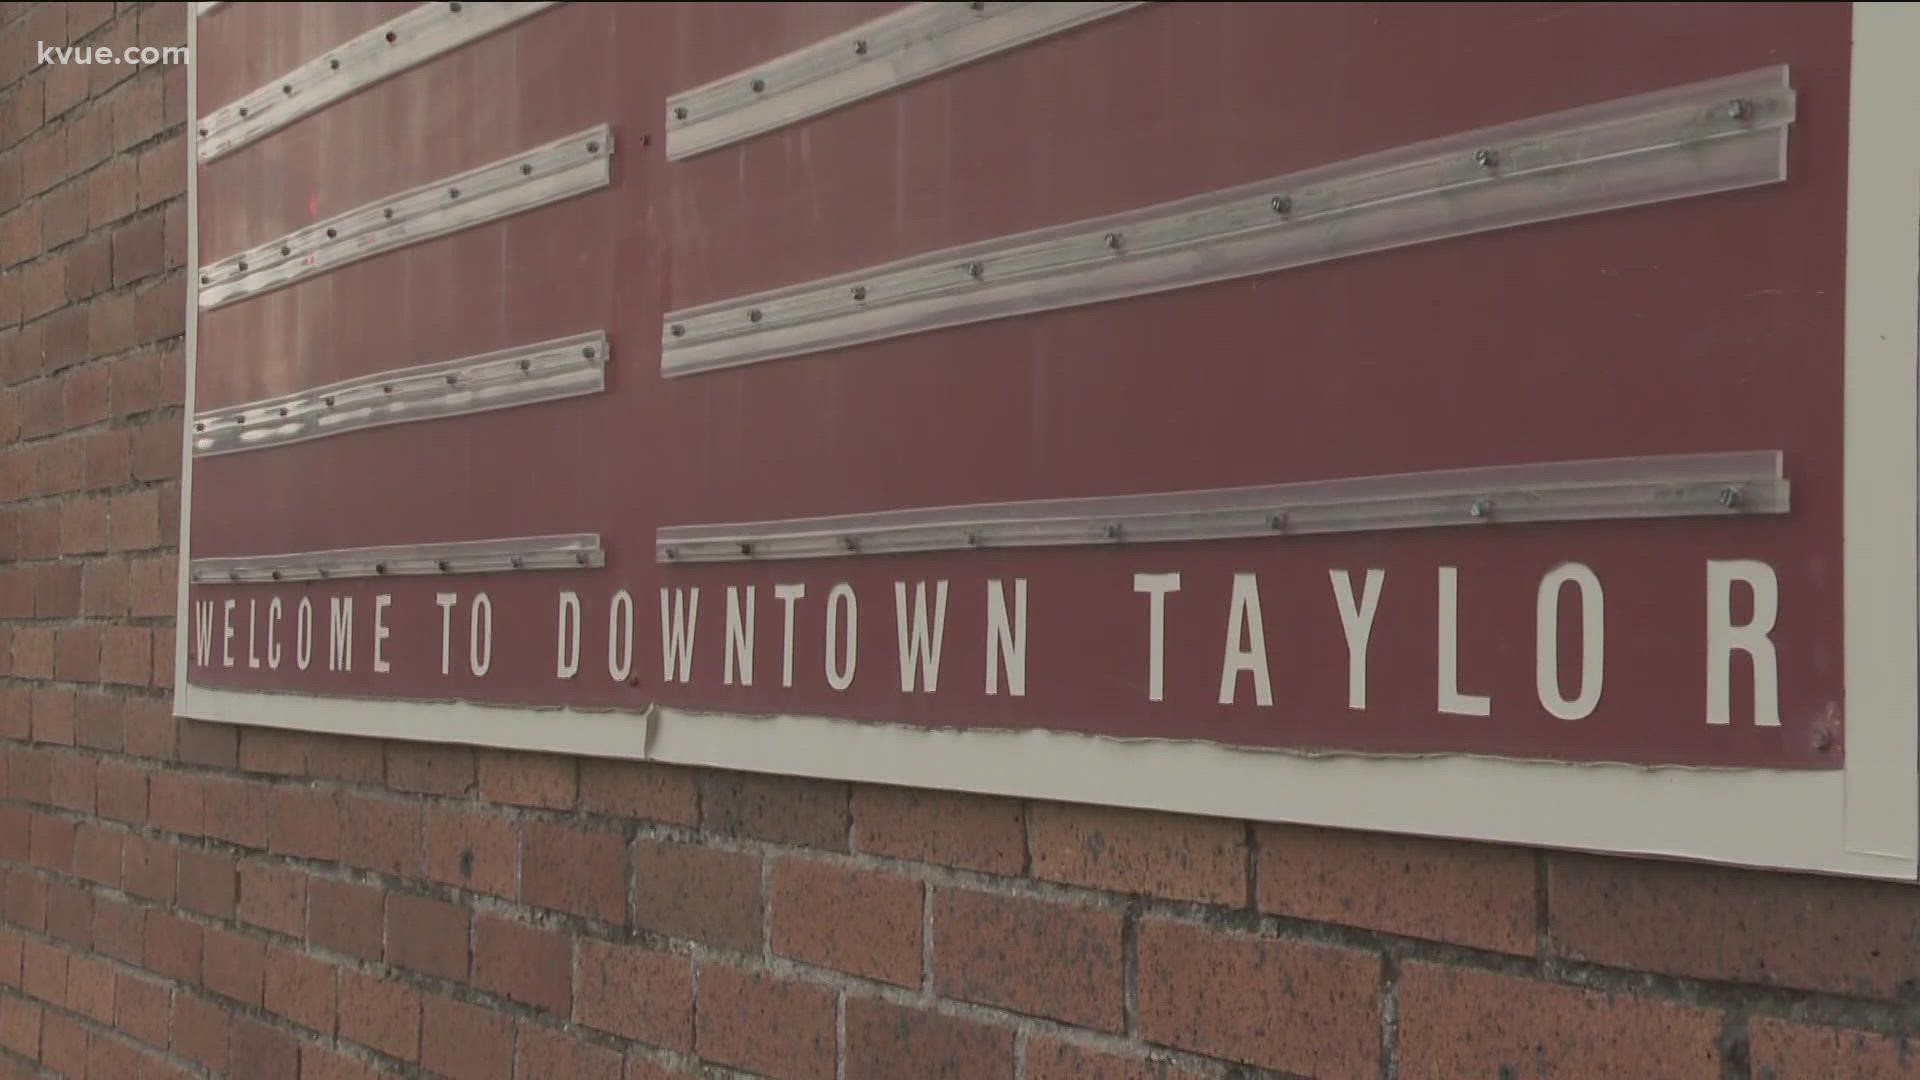 The City of Taylor and Williamson County approved millions of dollars in tax incentives, and Taylor ISD approved more incentives this month.